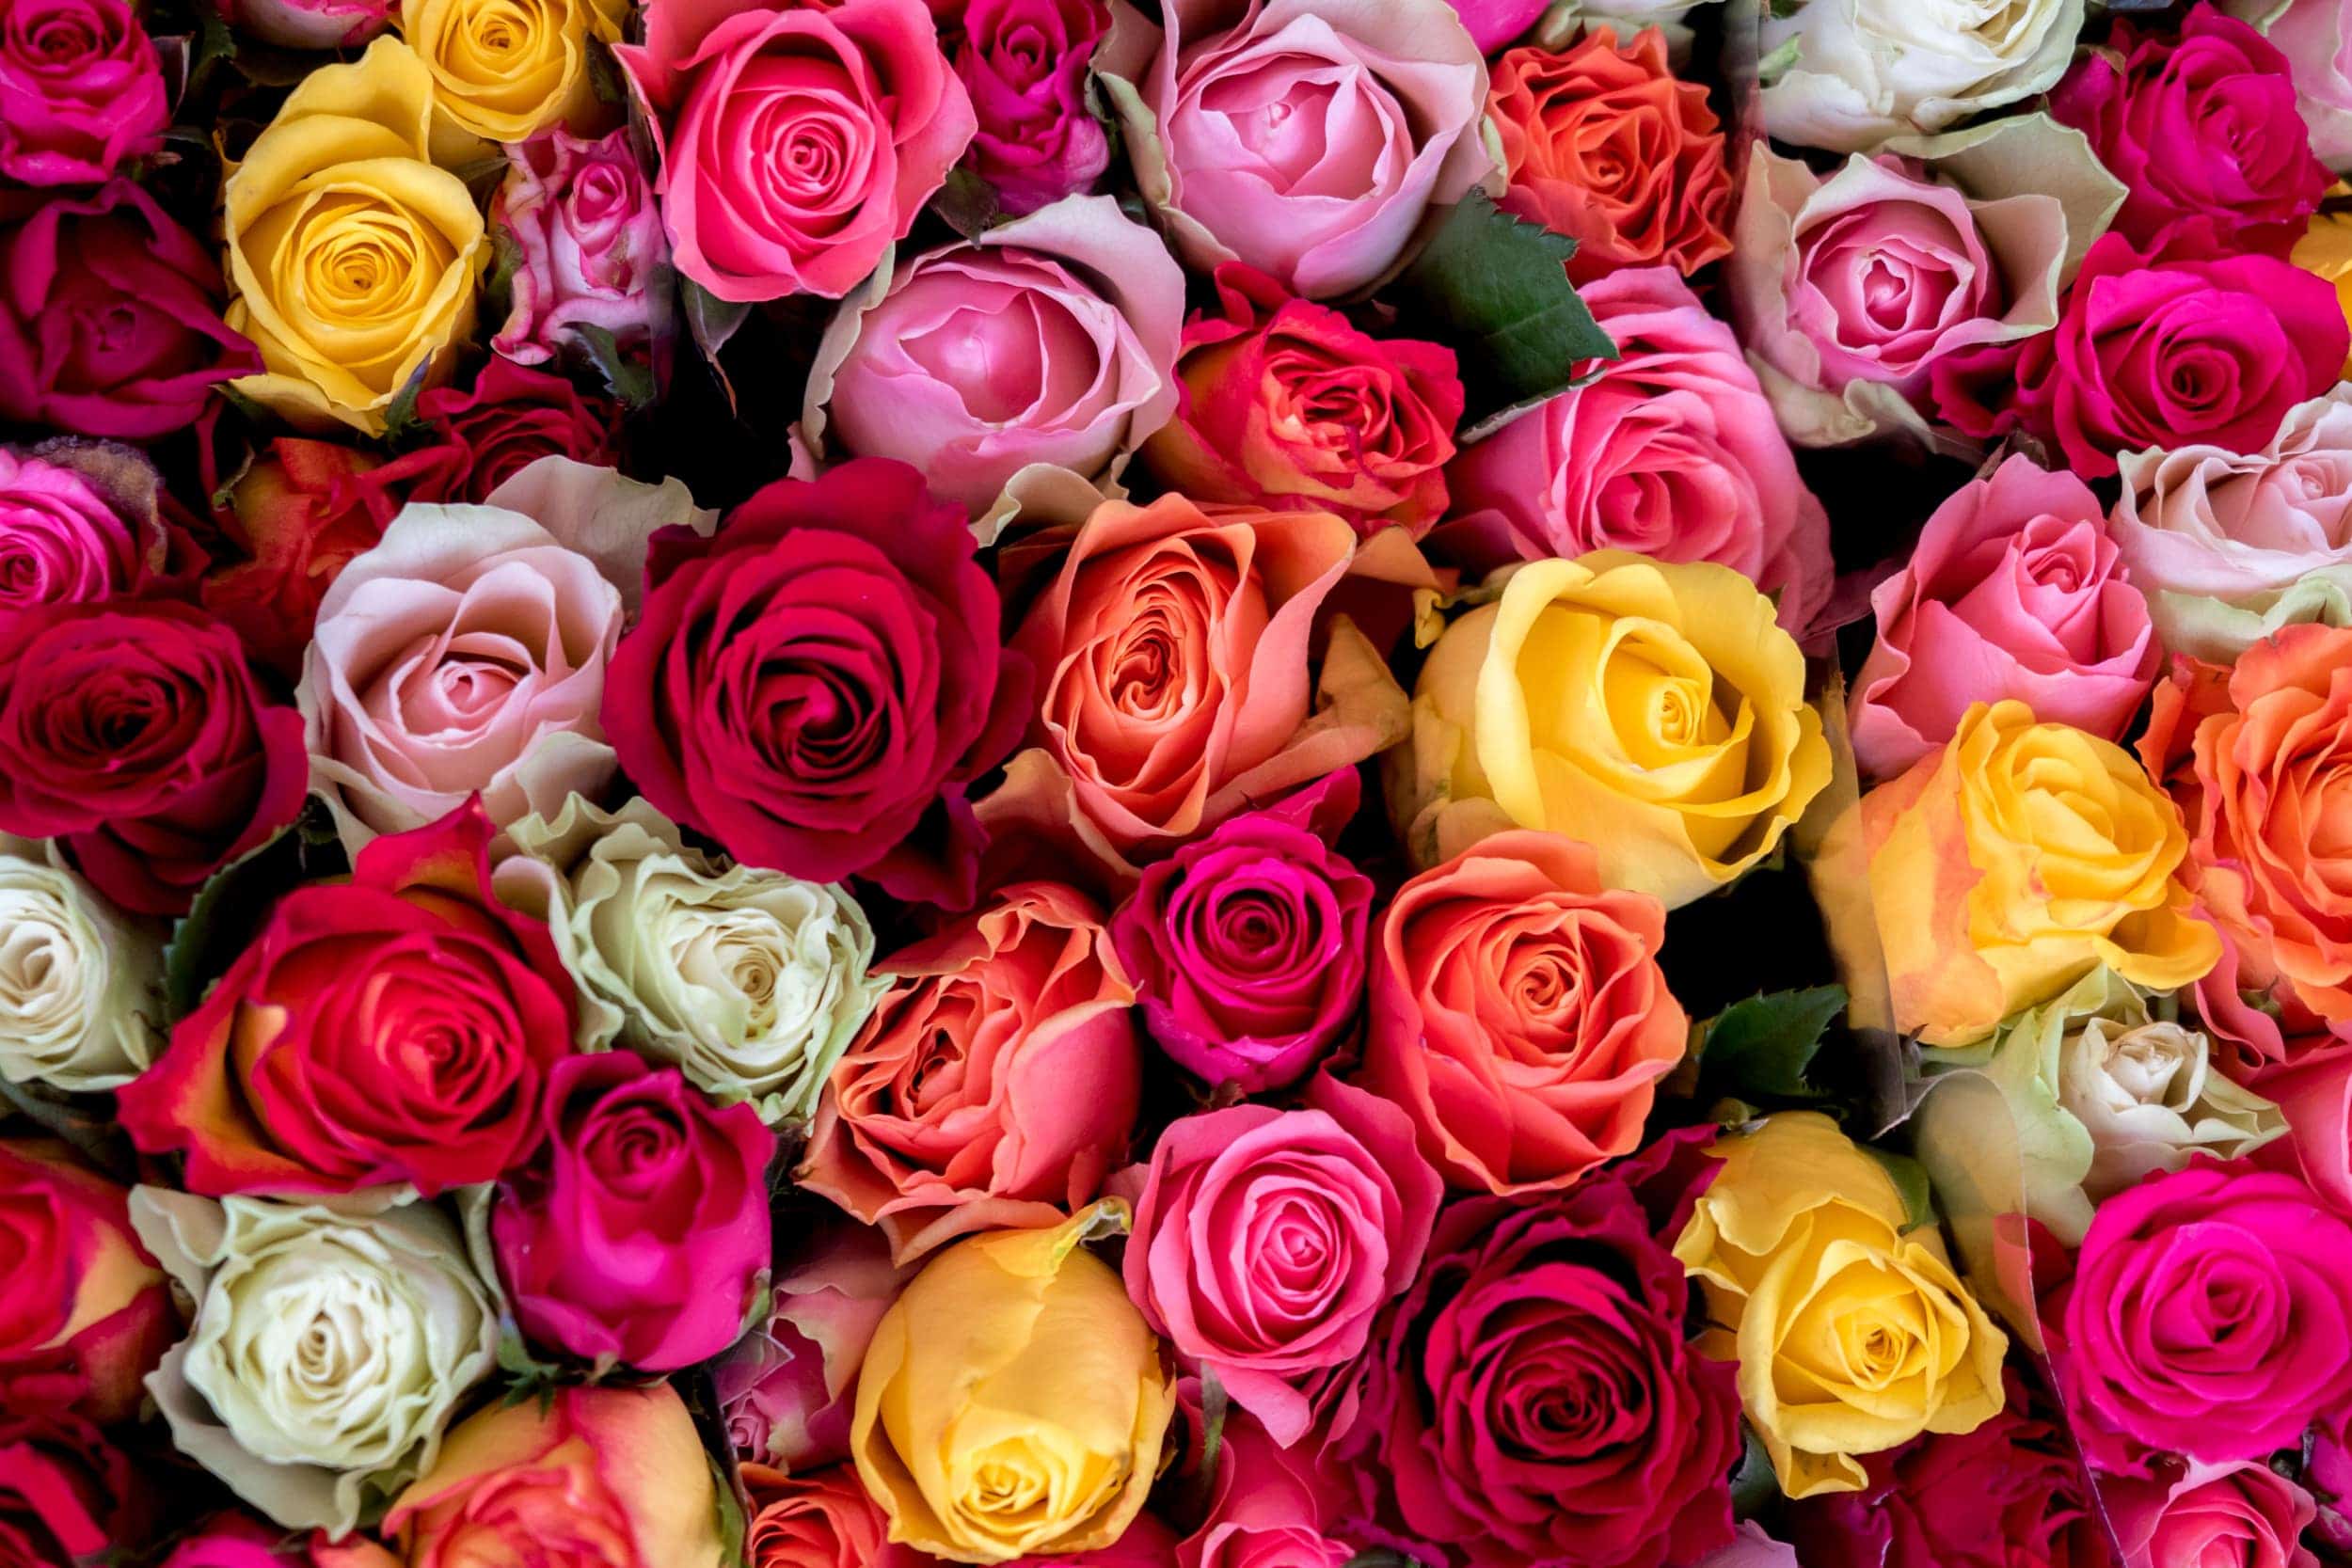 Roses in a large colourful bouquet